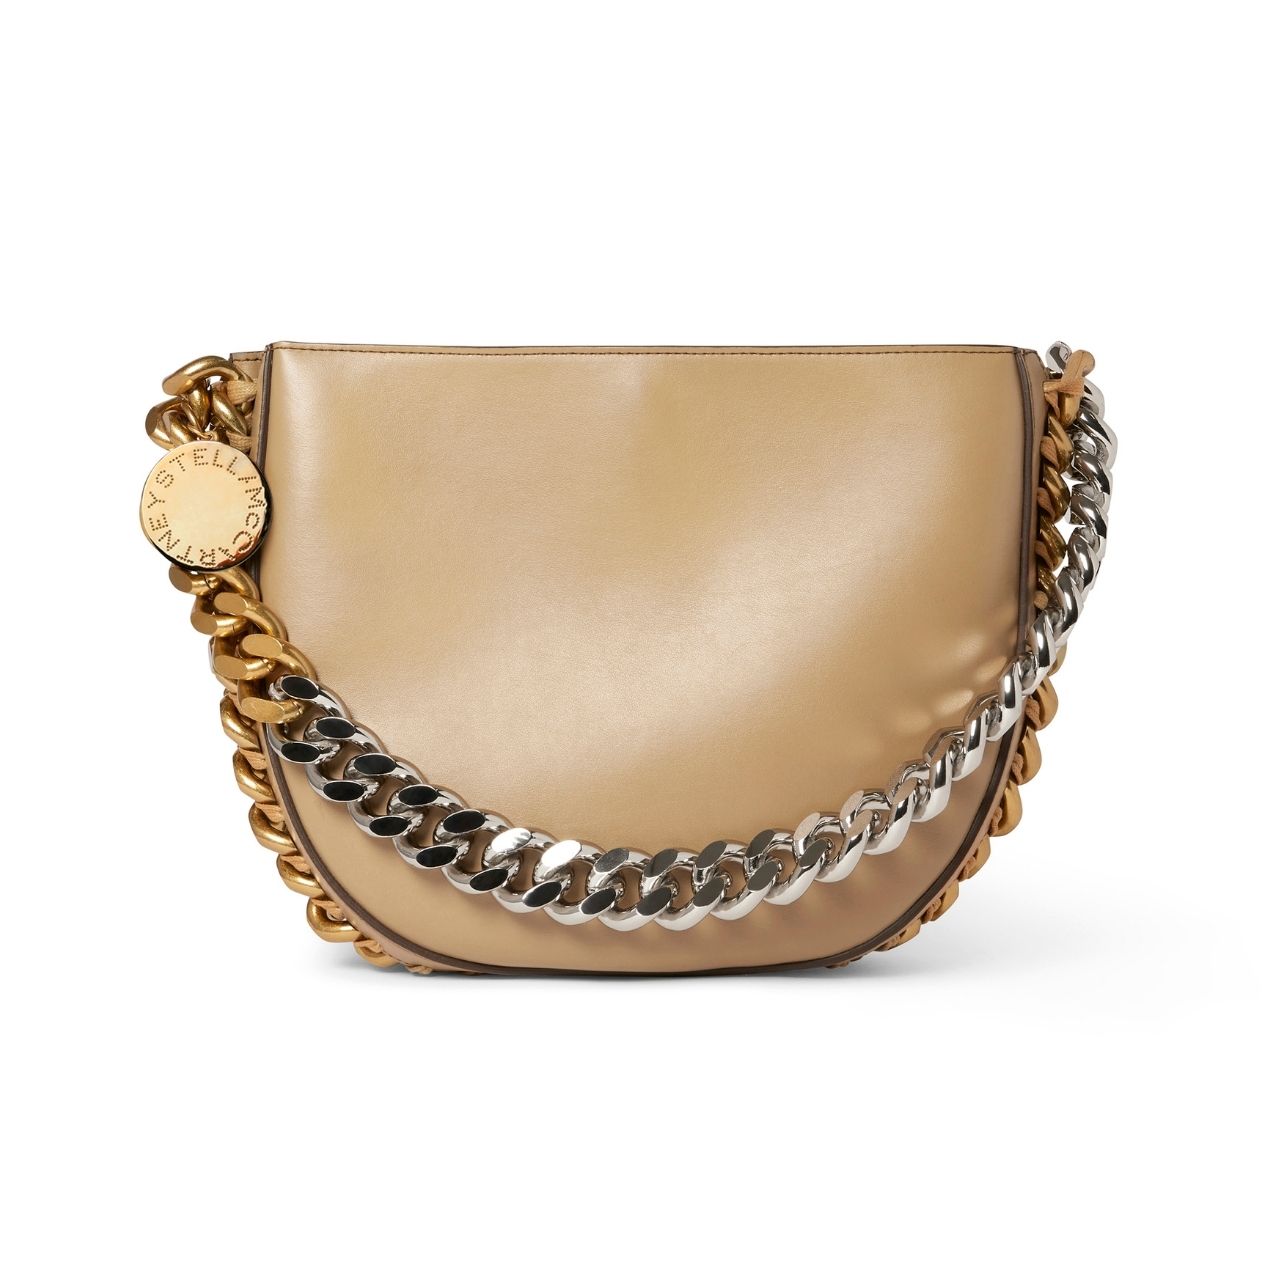 Stella McCartney tan purse with oversized mixed-metal chain strap